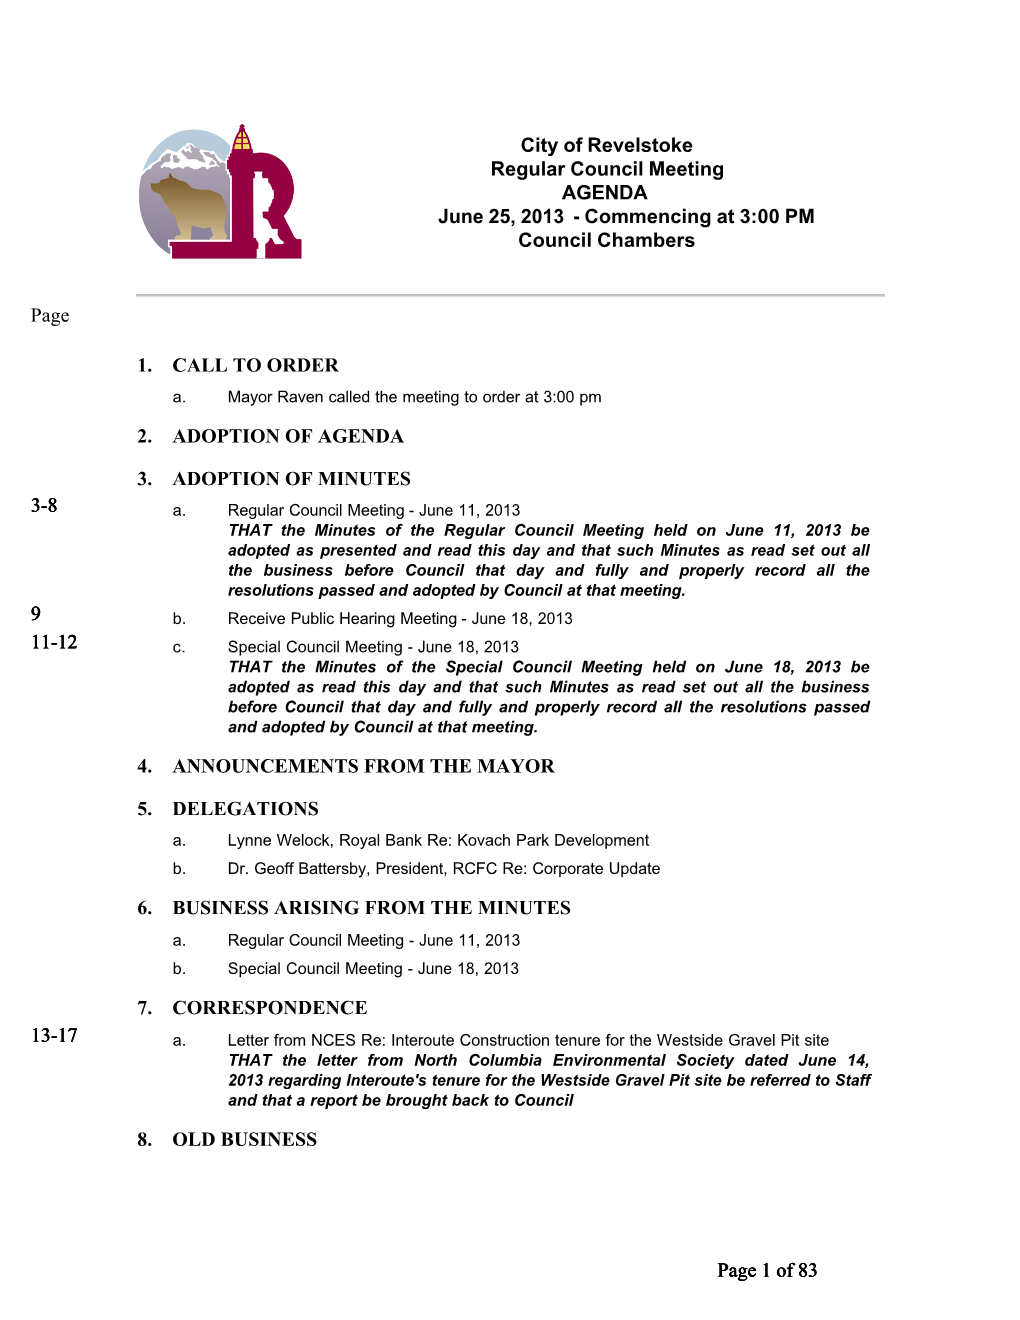 City of Revelstoke Regular Council Meeting AGENDA June 25, 2013 - Commencing at 3:00 PM Council Chambers